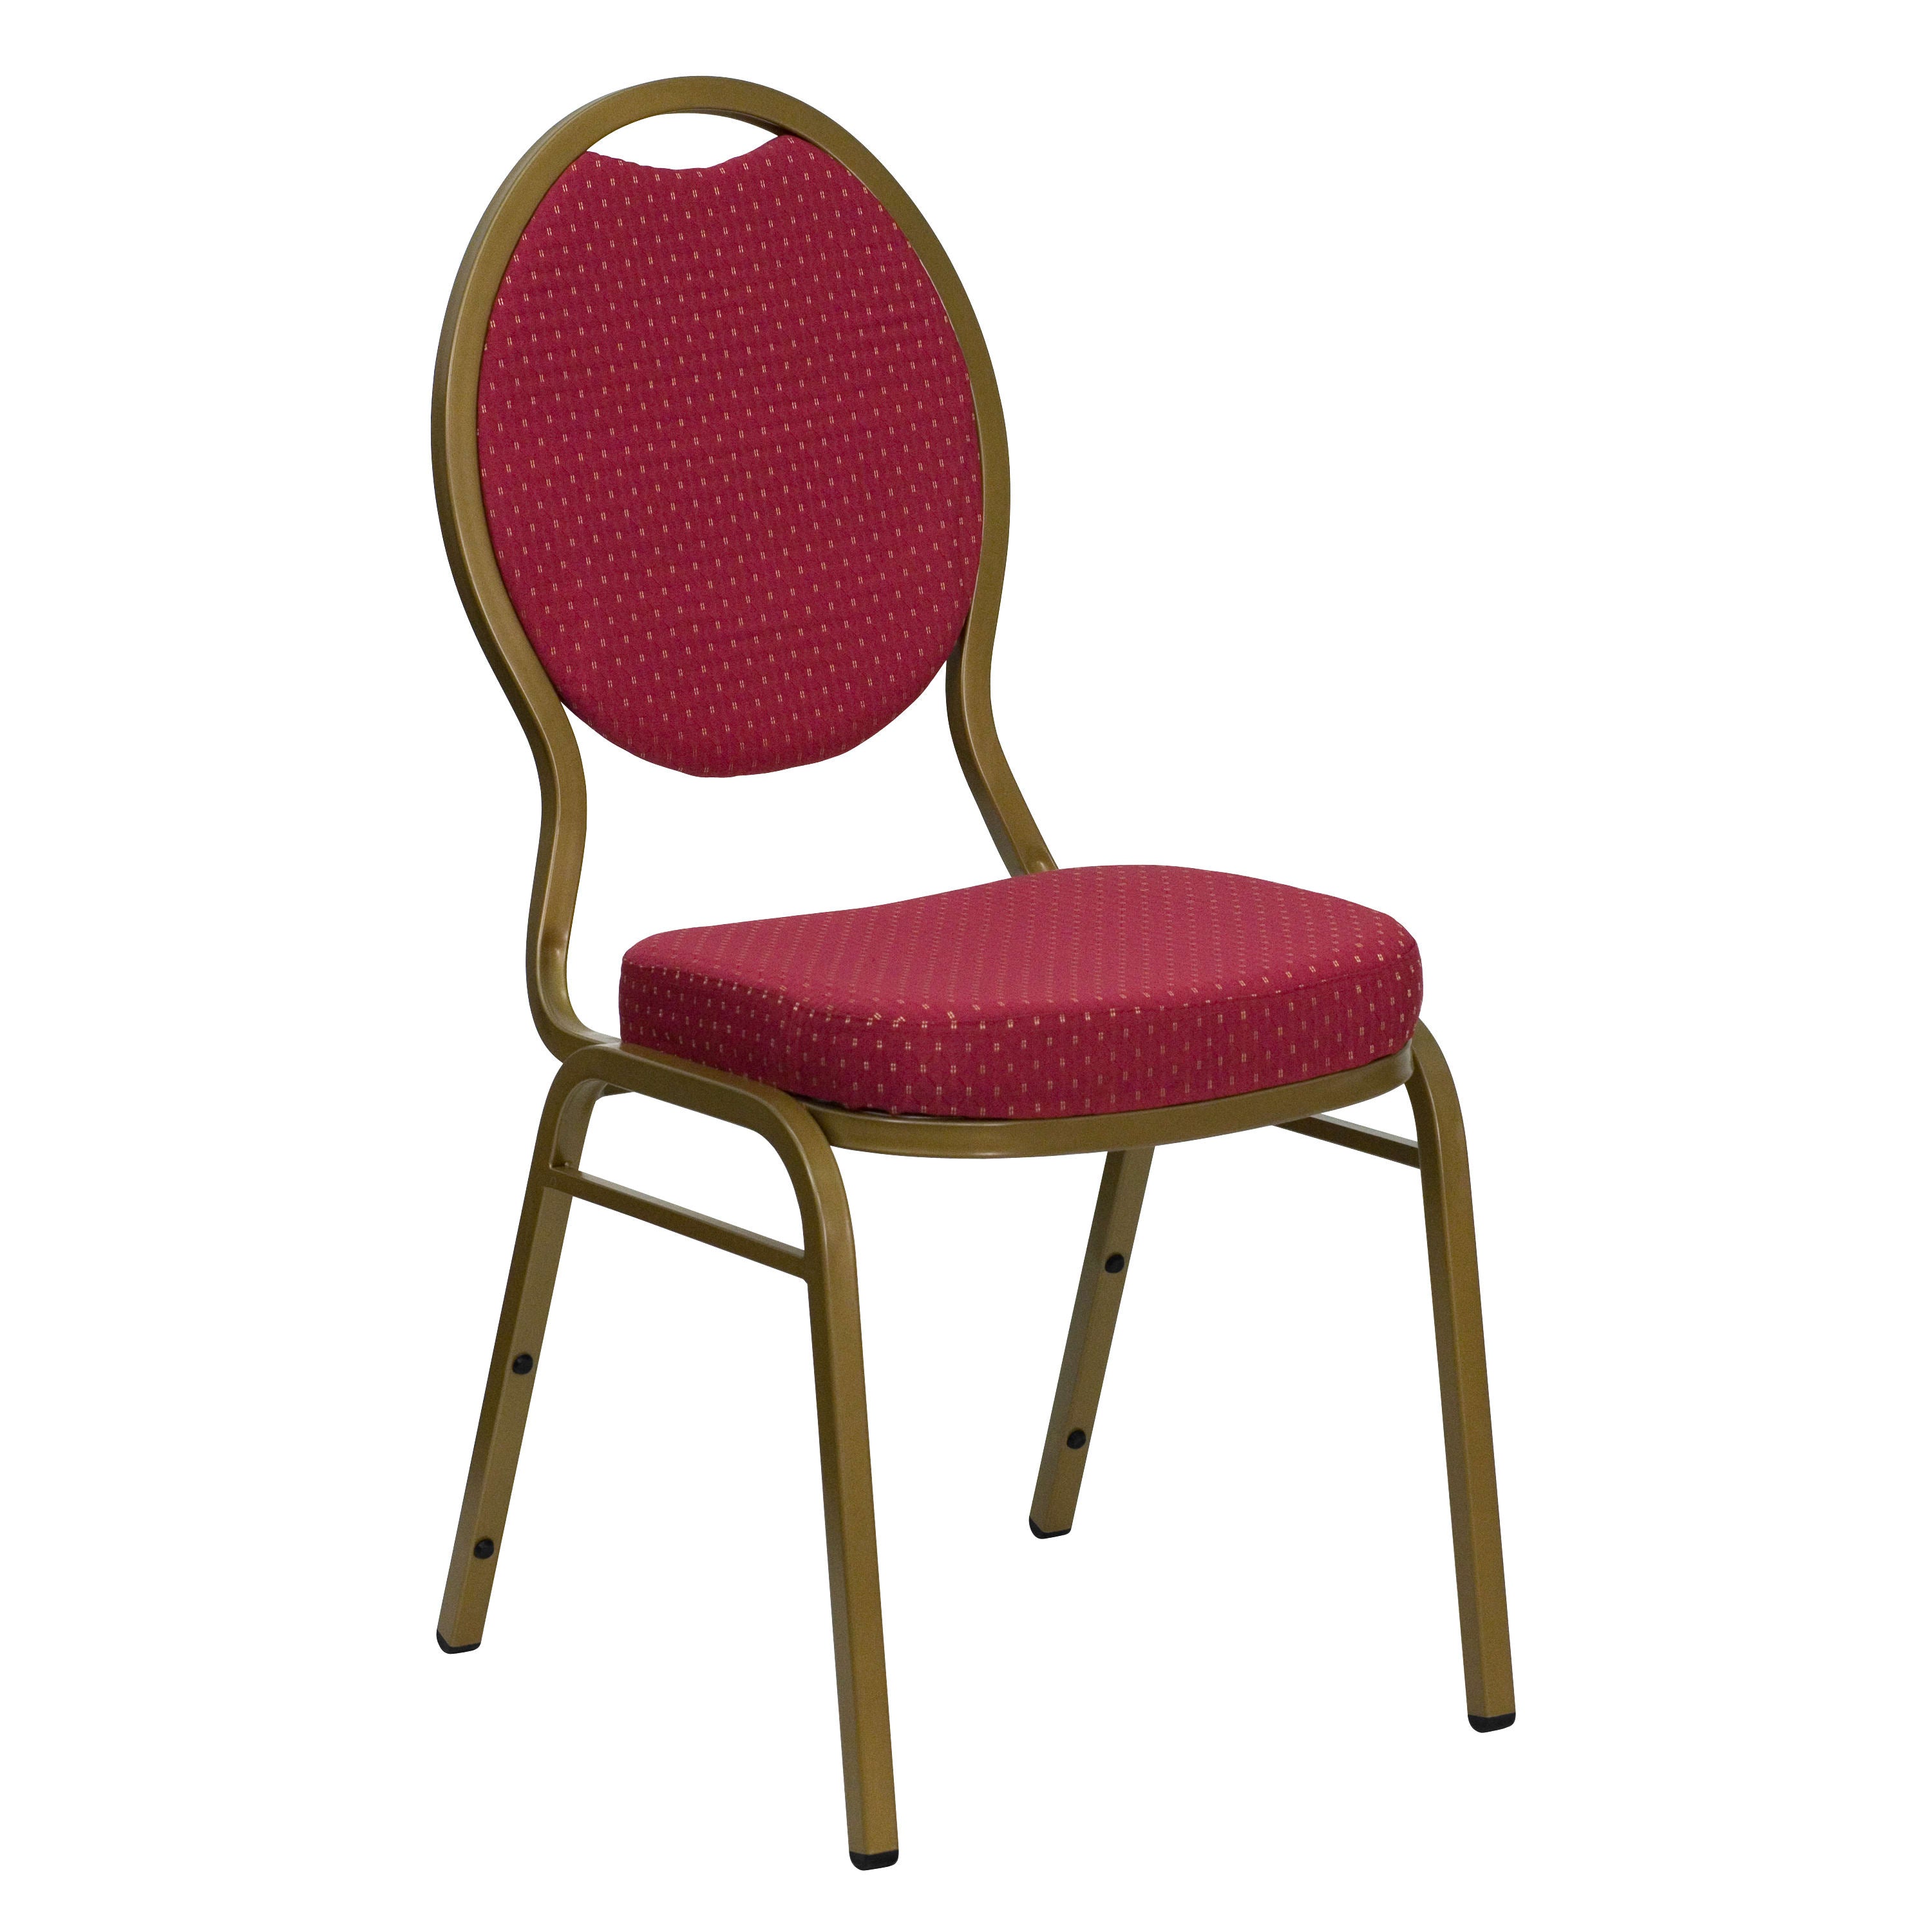 Trapezoidal Back Banquet Chair FD-BHF-1- – Stack Chairs 4 Less